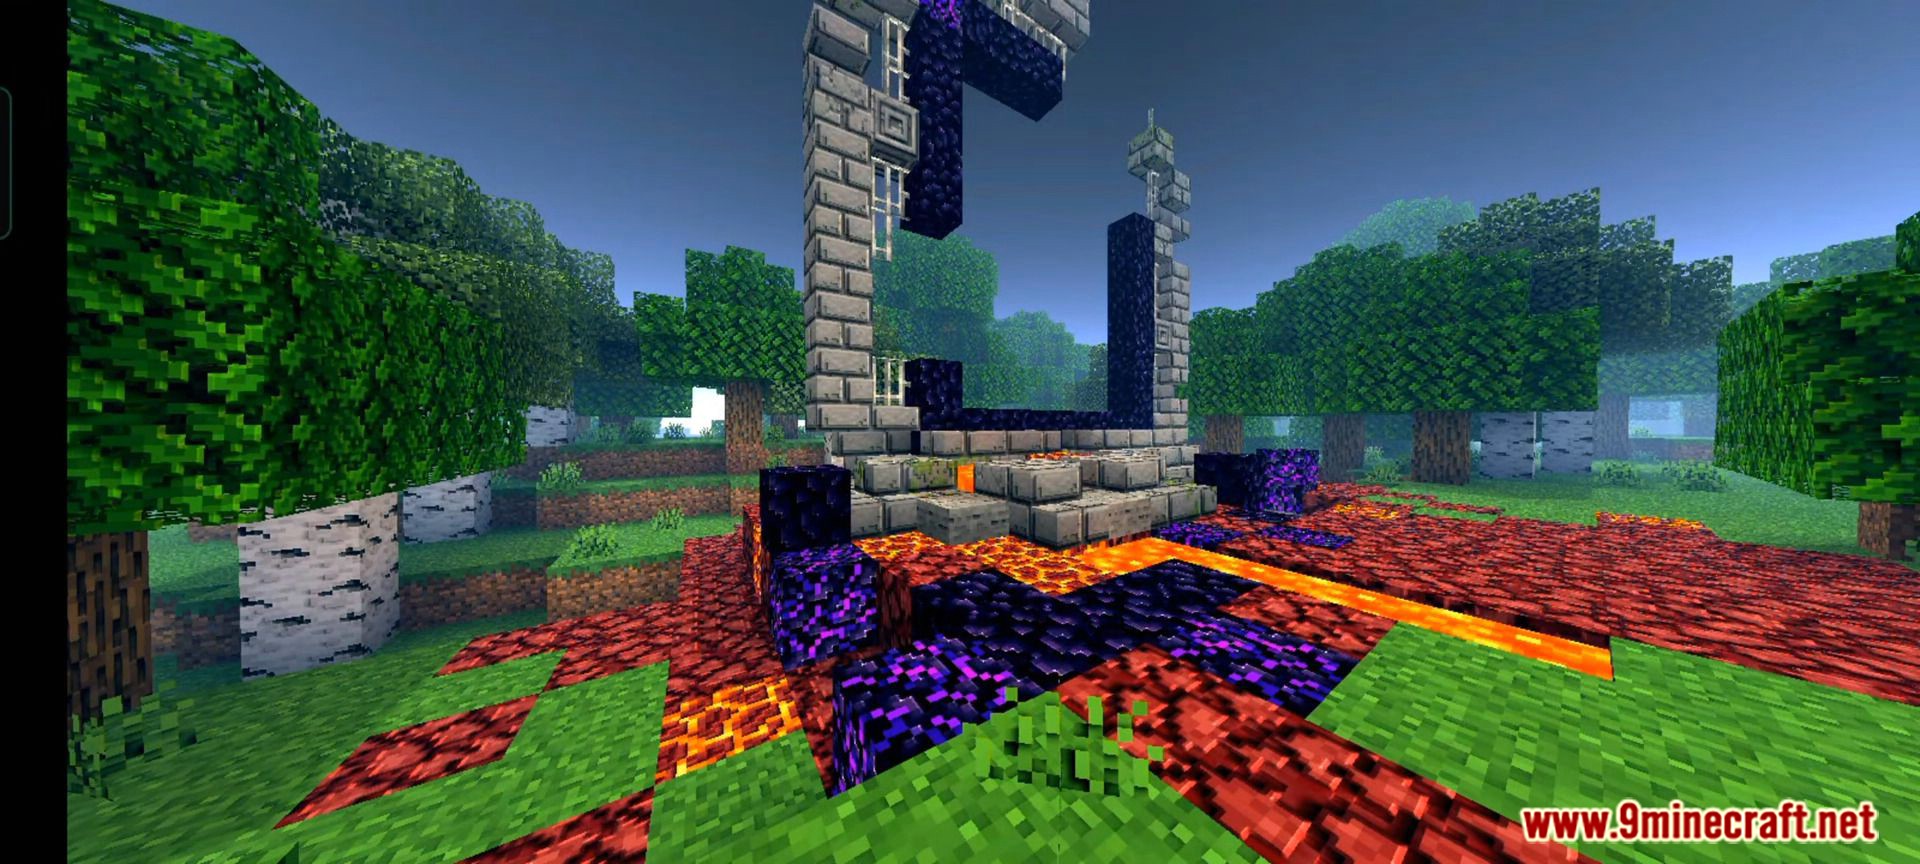 Minecraft 3D Pack (1.19, 1.18) - Realistic RTX Pack for MCPE/Bedrock 5